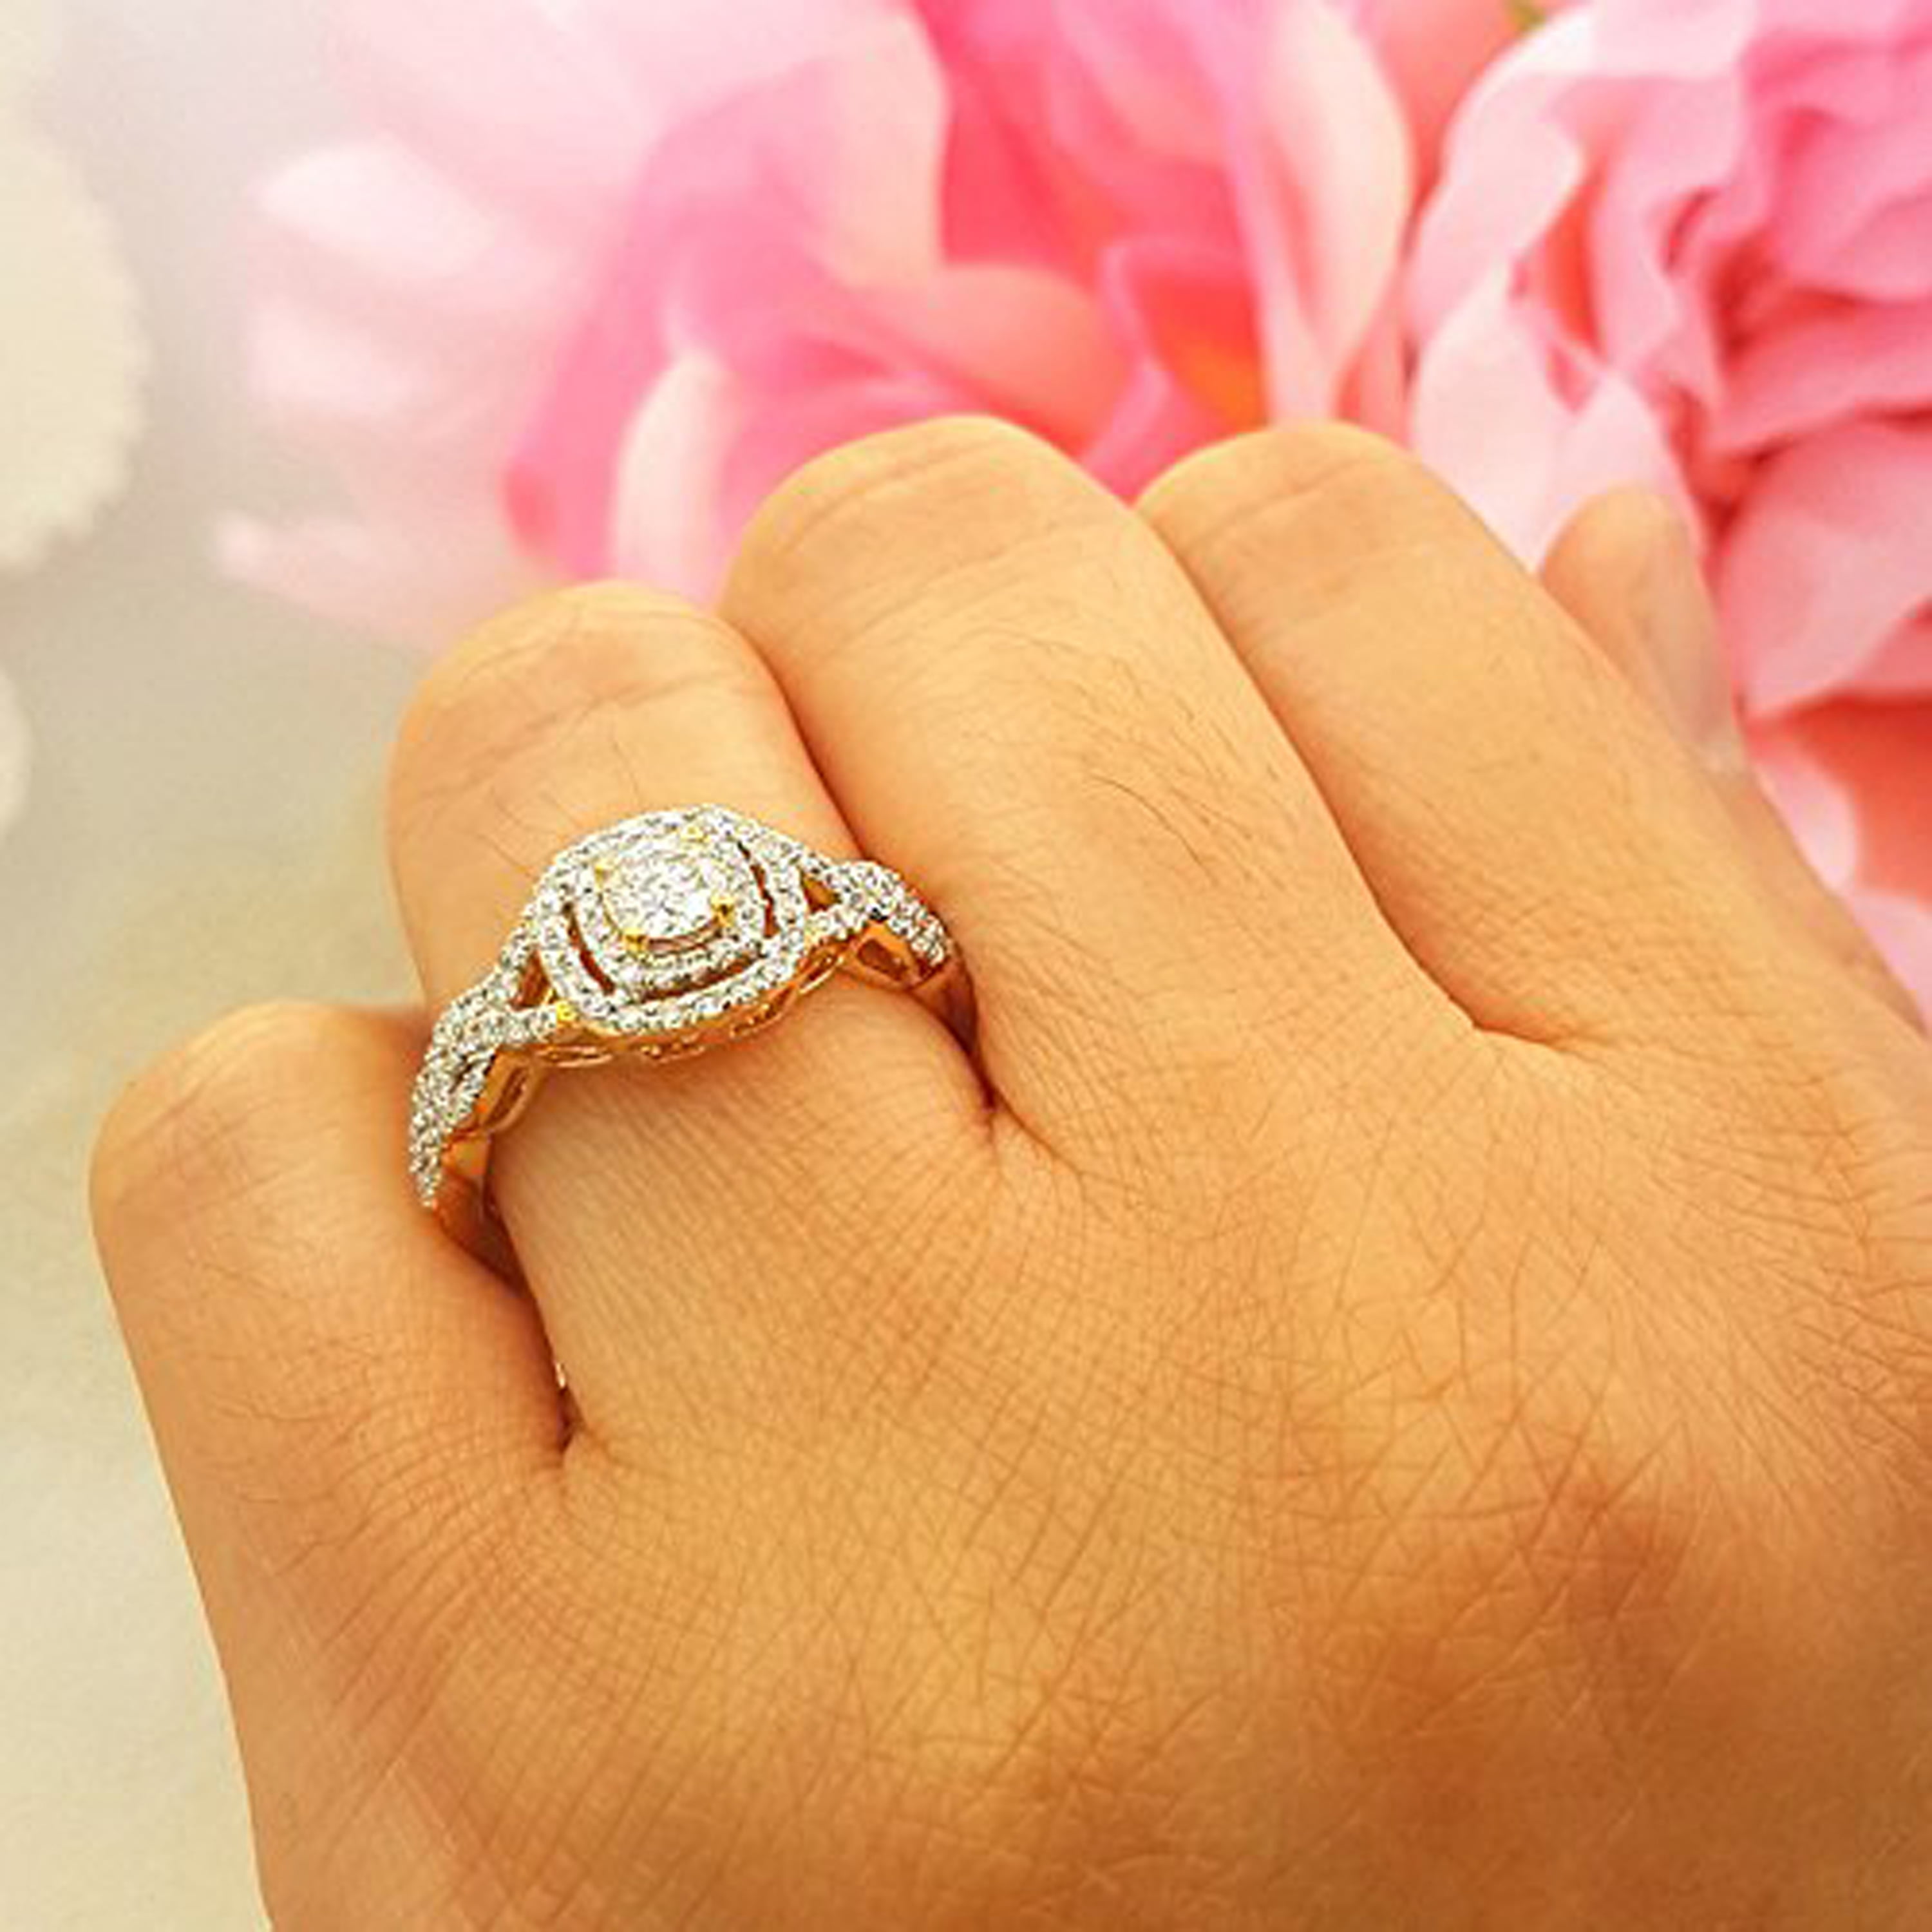 14K Gold Round White Diamond Ladies Letter 'D' Initial Ring 1/10 CT ctw Dazzlingrock Collection 0.10 Carat